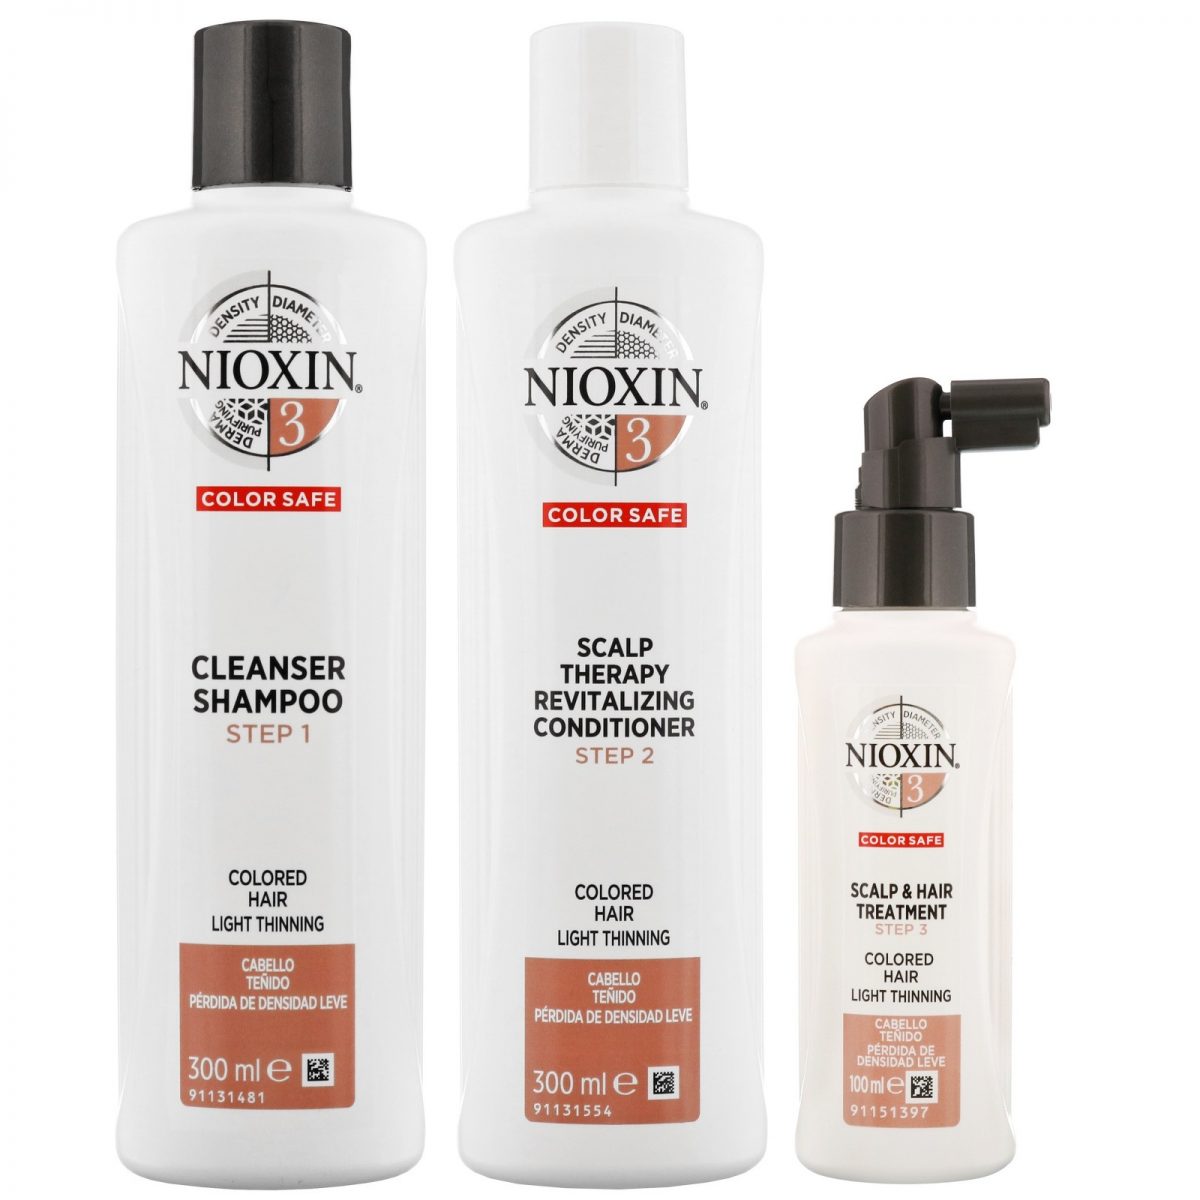 06_Emphase_Nioxin-3d-care-system-3_Cleanser_Shampoo_Colored_Hair_Light_Thinning_300ml_Conditioner_300ml_Scalp_Hair_Treatment_100ml